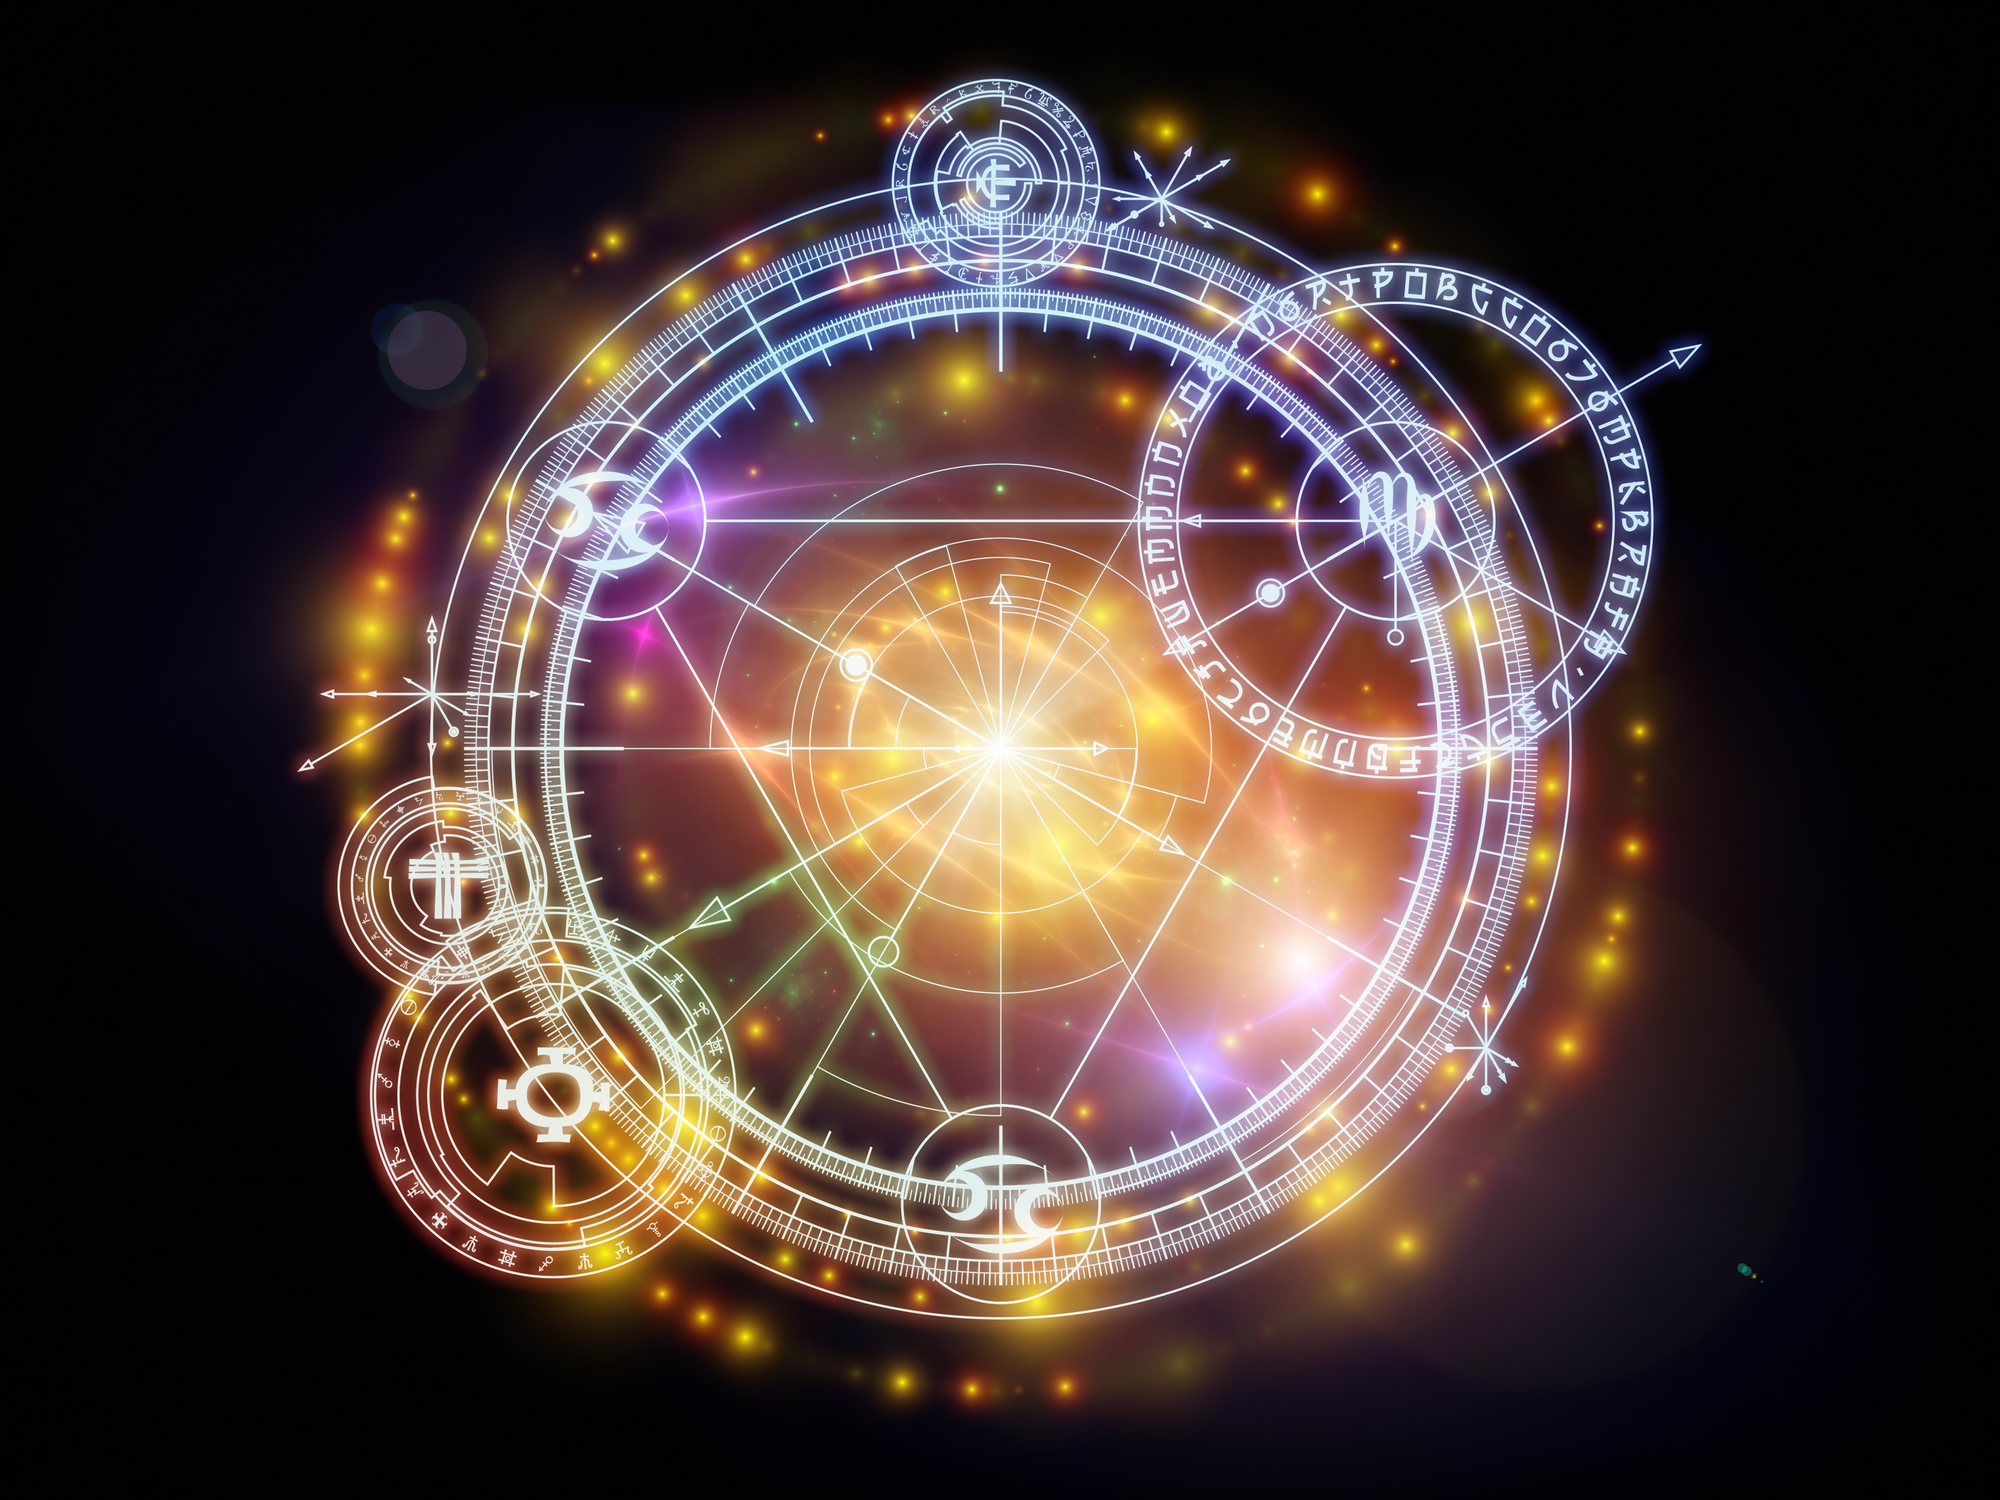 Get the Astrology scoop from HCC Times own Trent Tabor.